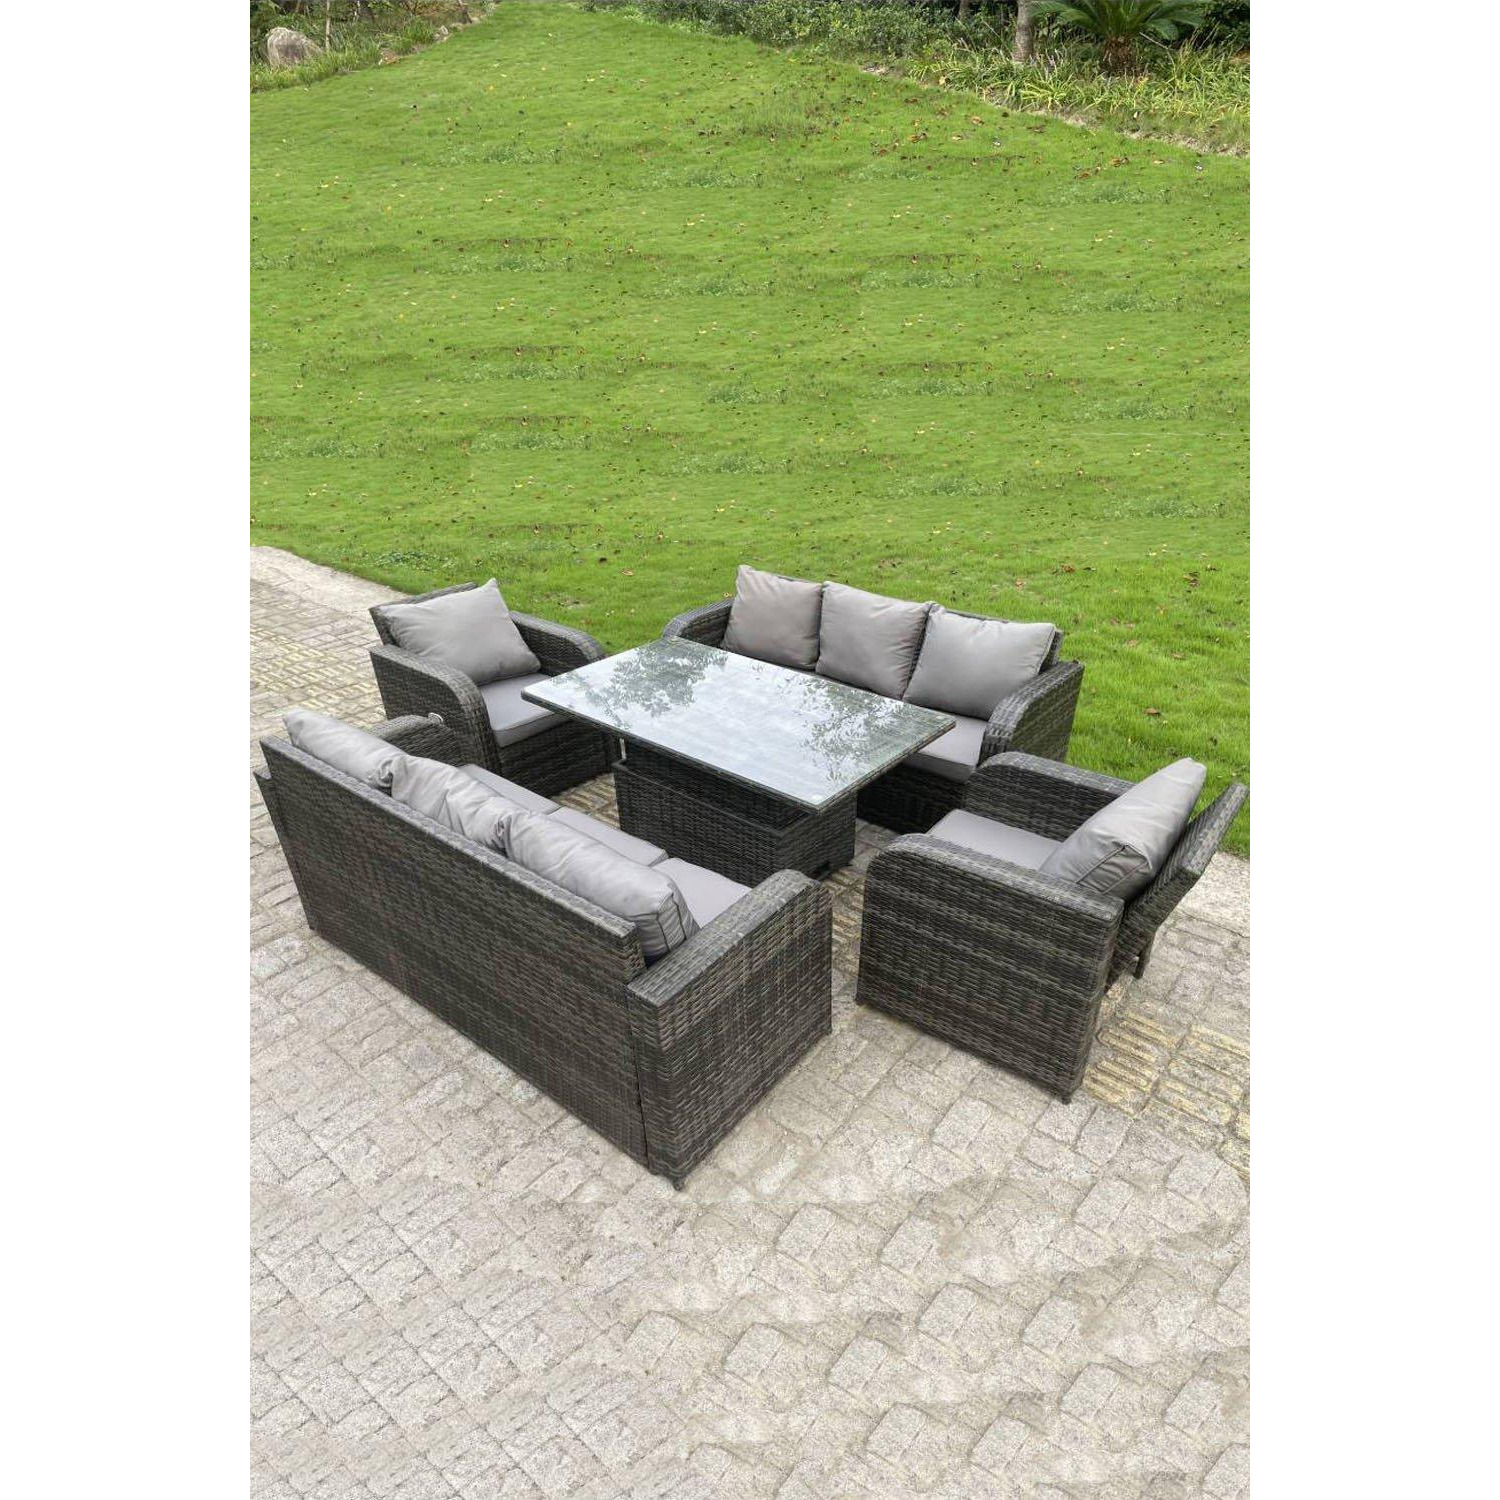 Outdoor Rattan  Sofa Set Lounge Dining Table Height Adjustable Lifting Table Reclining Chairs - image 1